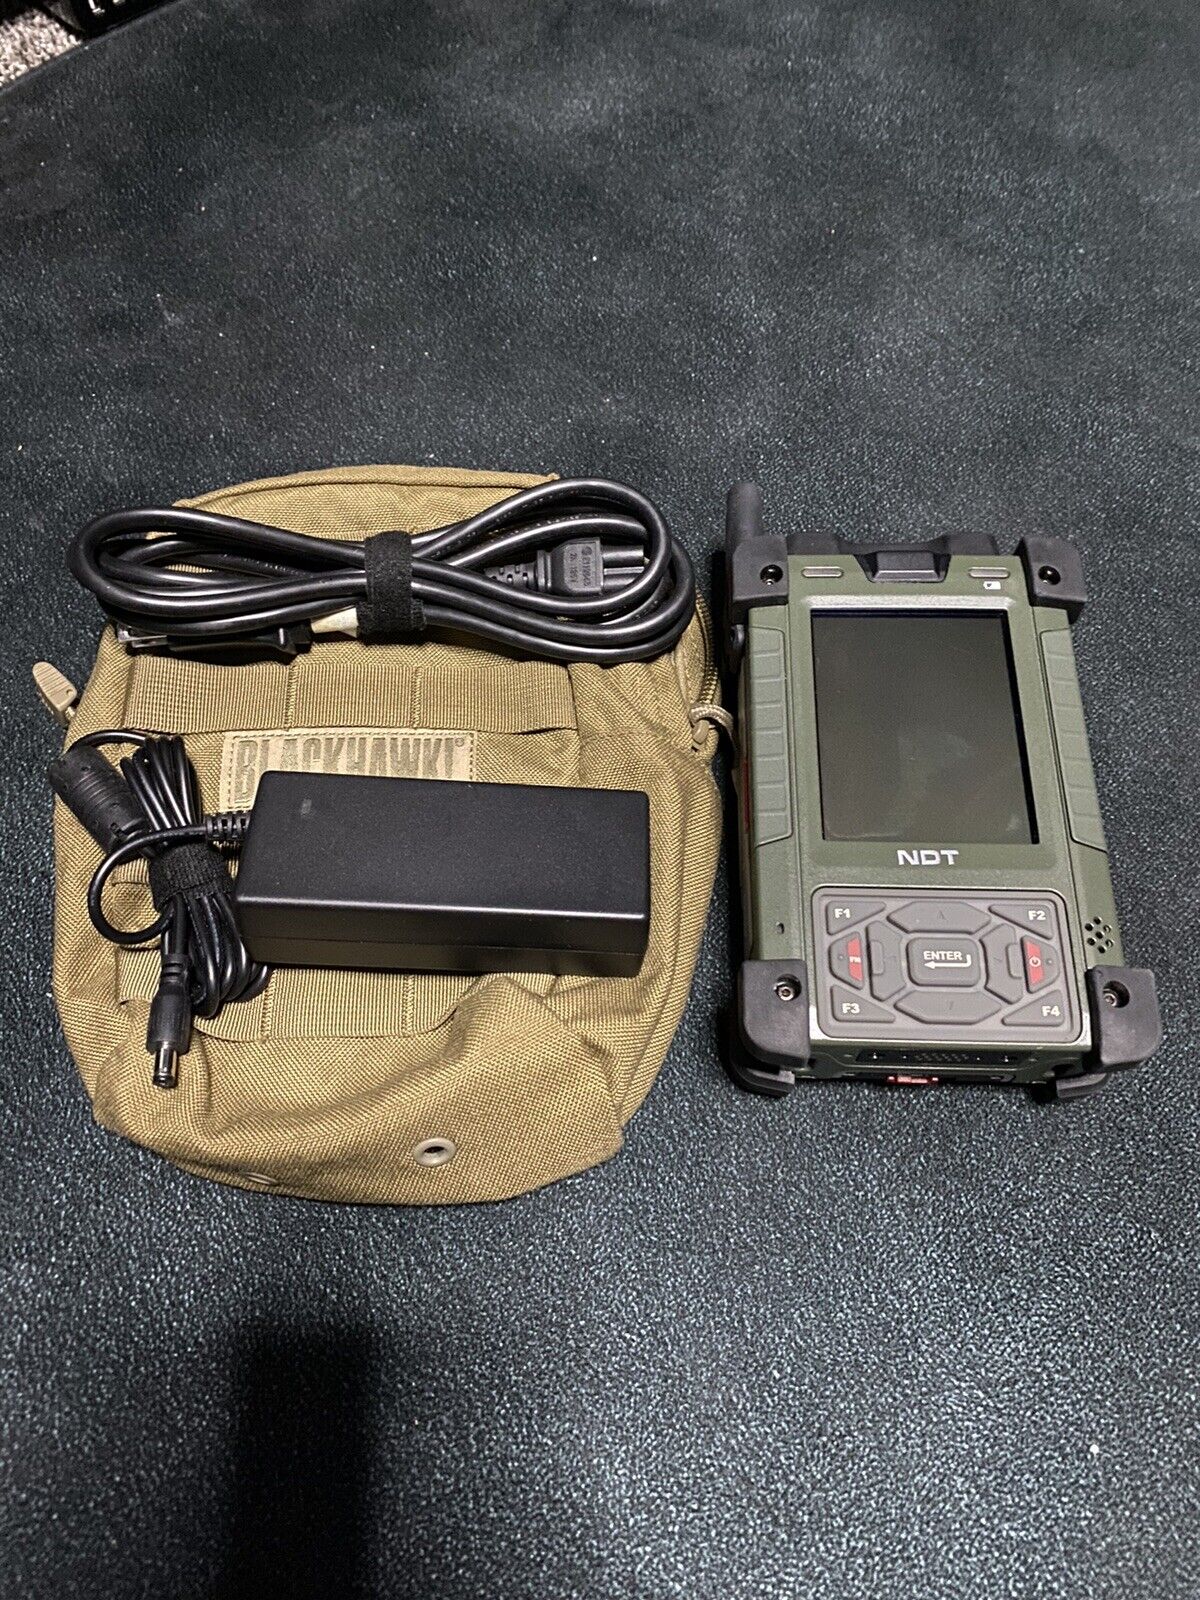 Military PDA Computer With Blackhawk Pouch New Condition NOS